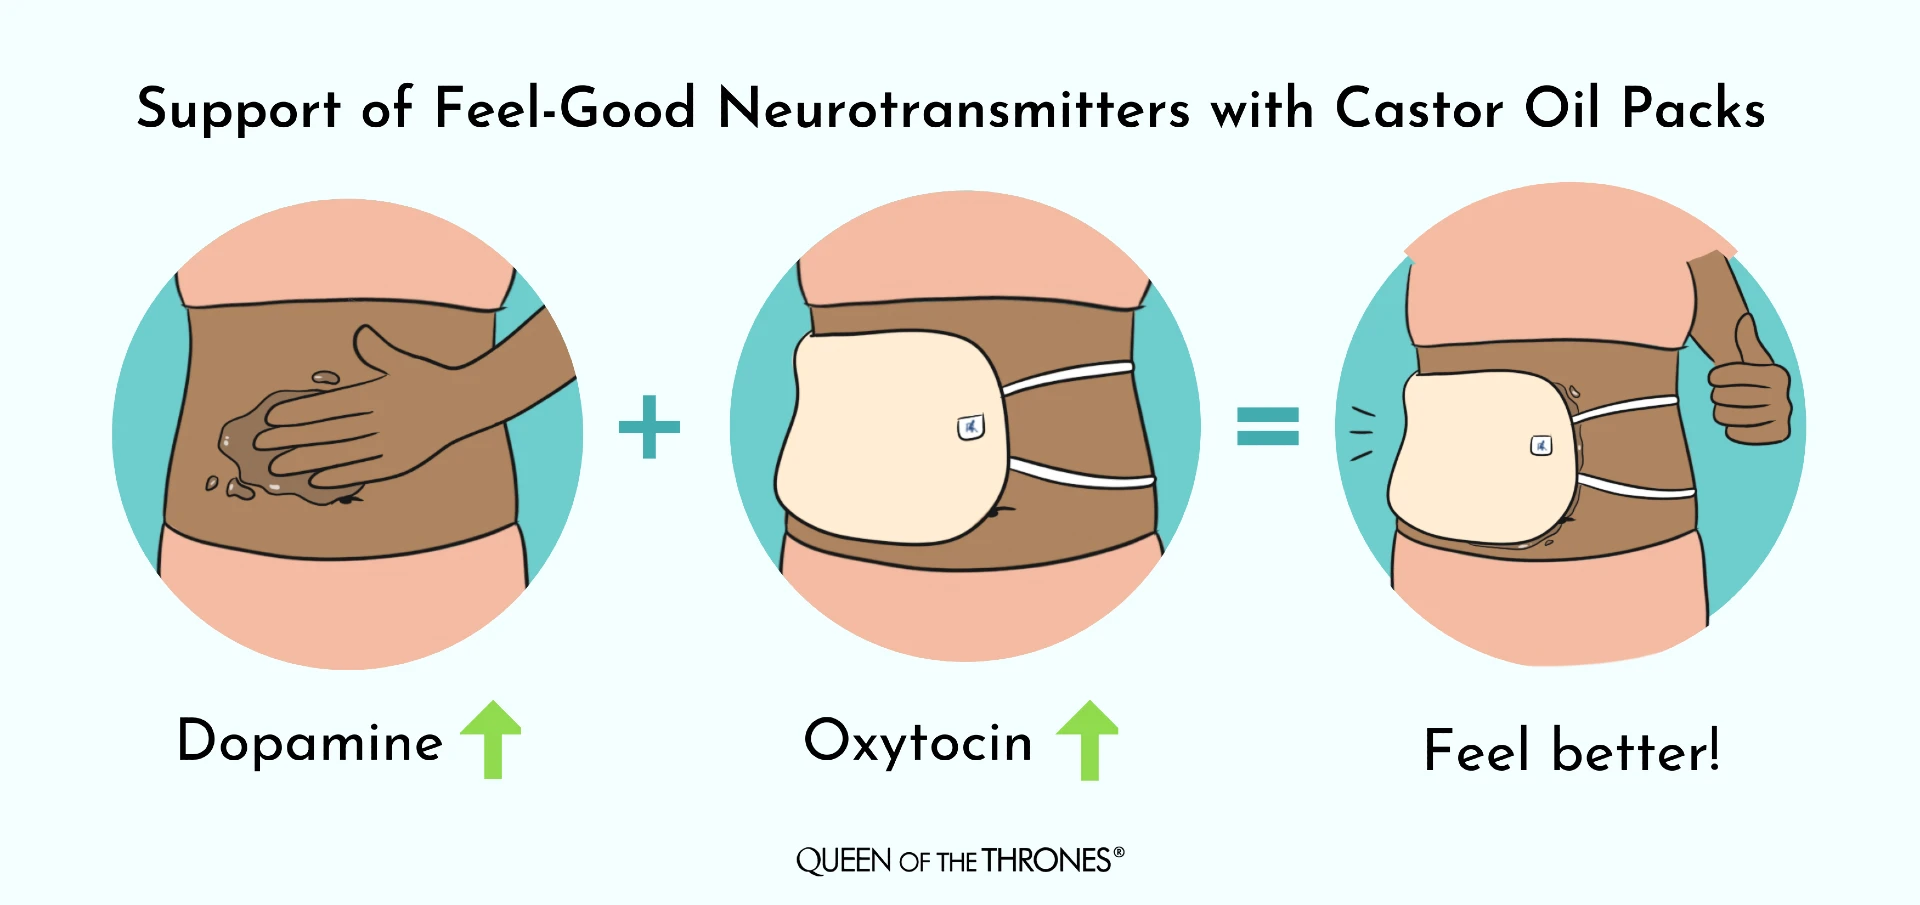 Queen of the Thrones Castor Oil Packs supports dopamine production